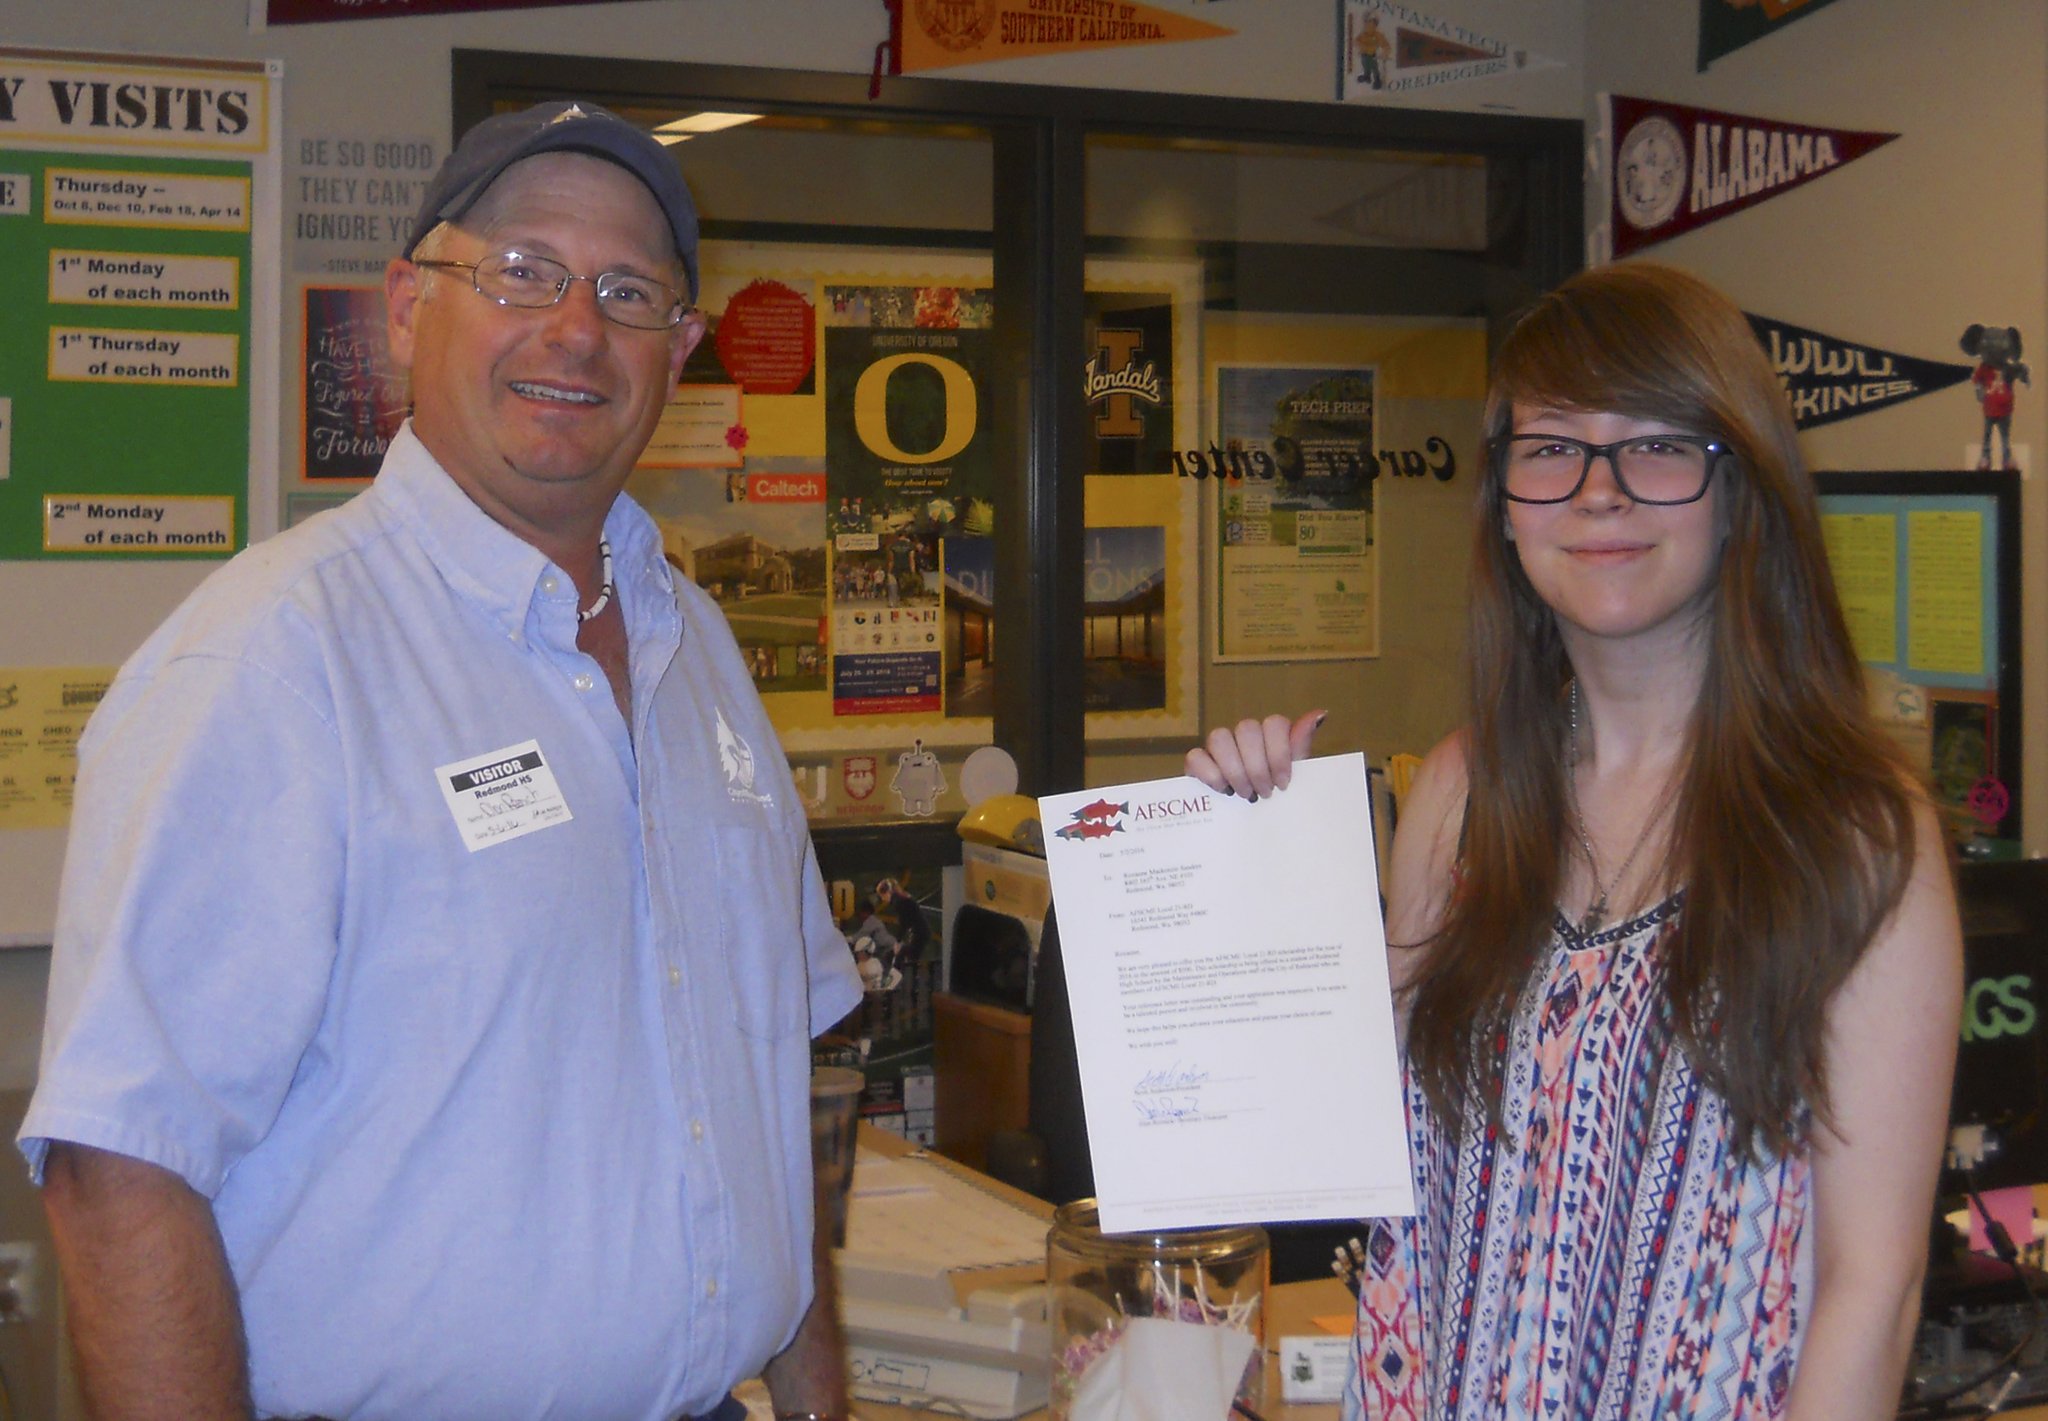 Redmond High senior Roxanne Mackenzie Sanders received a $500 scholarship from the AFSCME Local 21-RD (the maintenance workers for both public works and parks for the City of Redmond). Alan Reznick